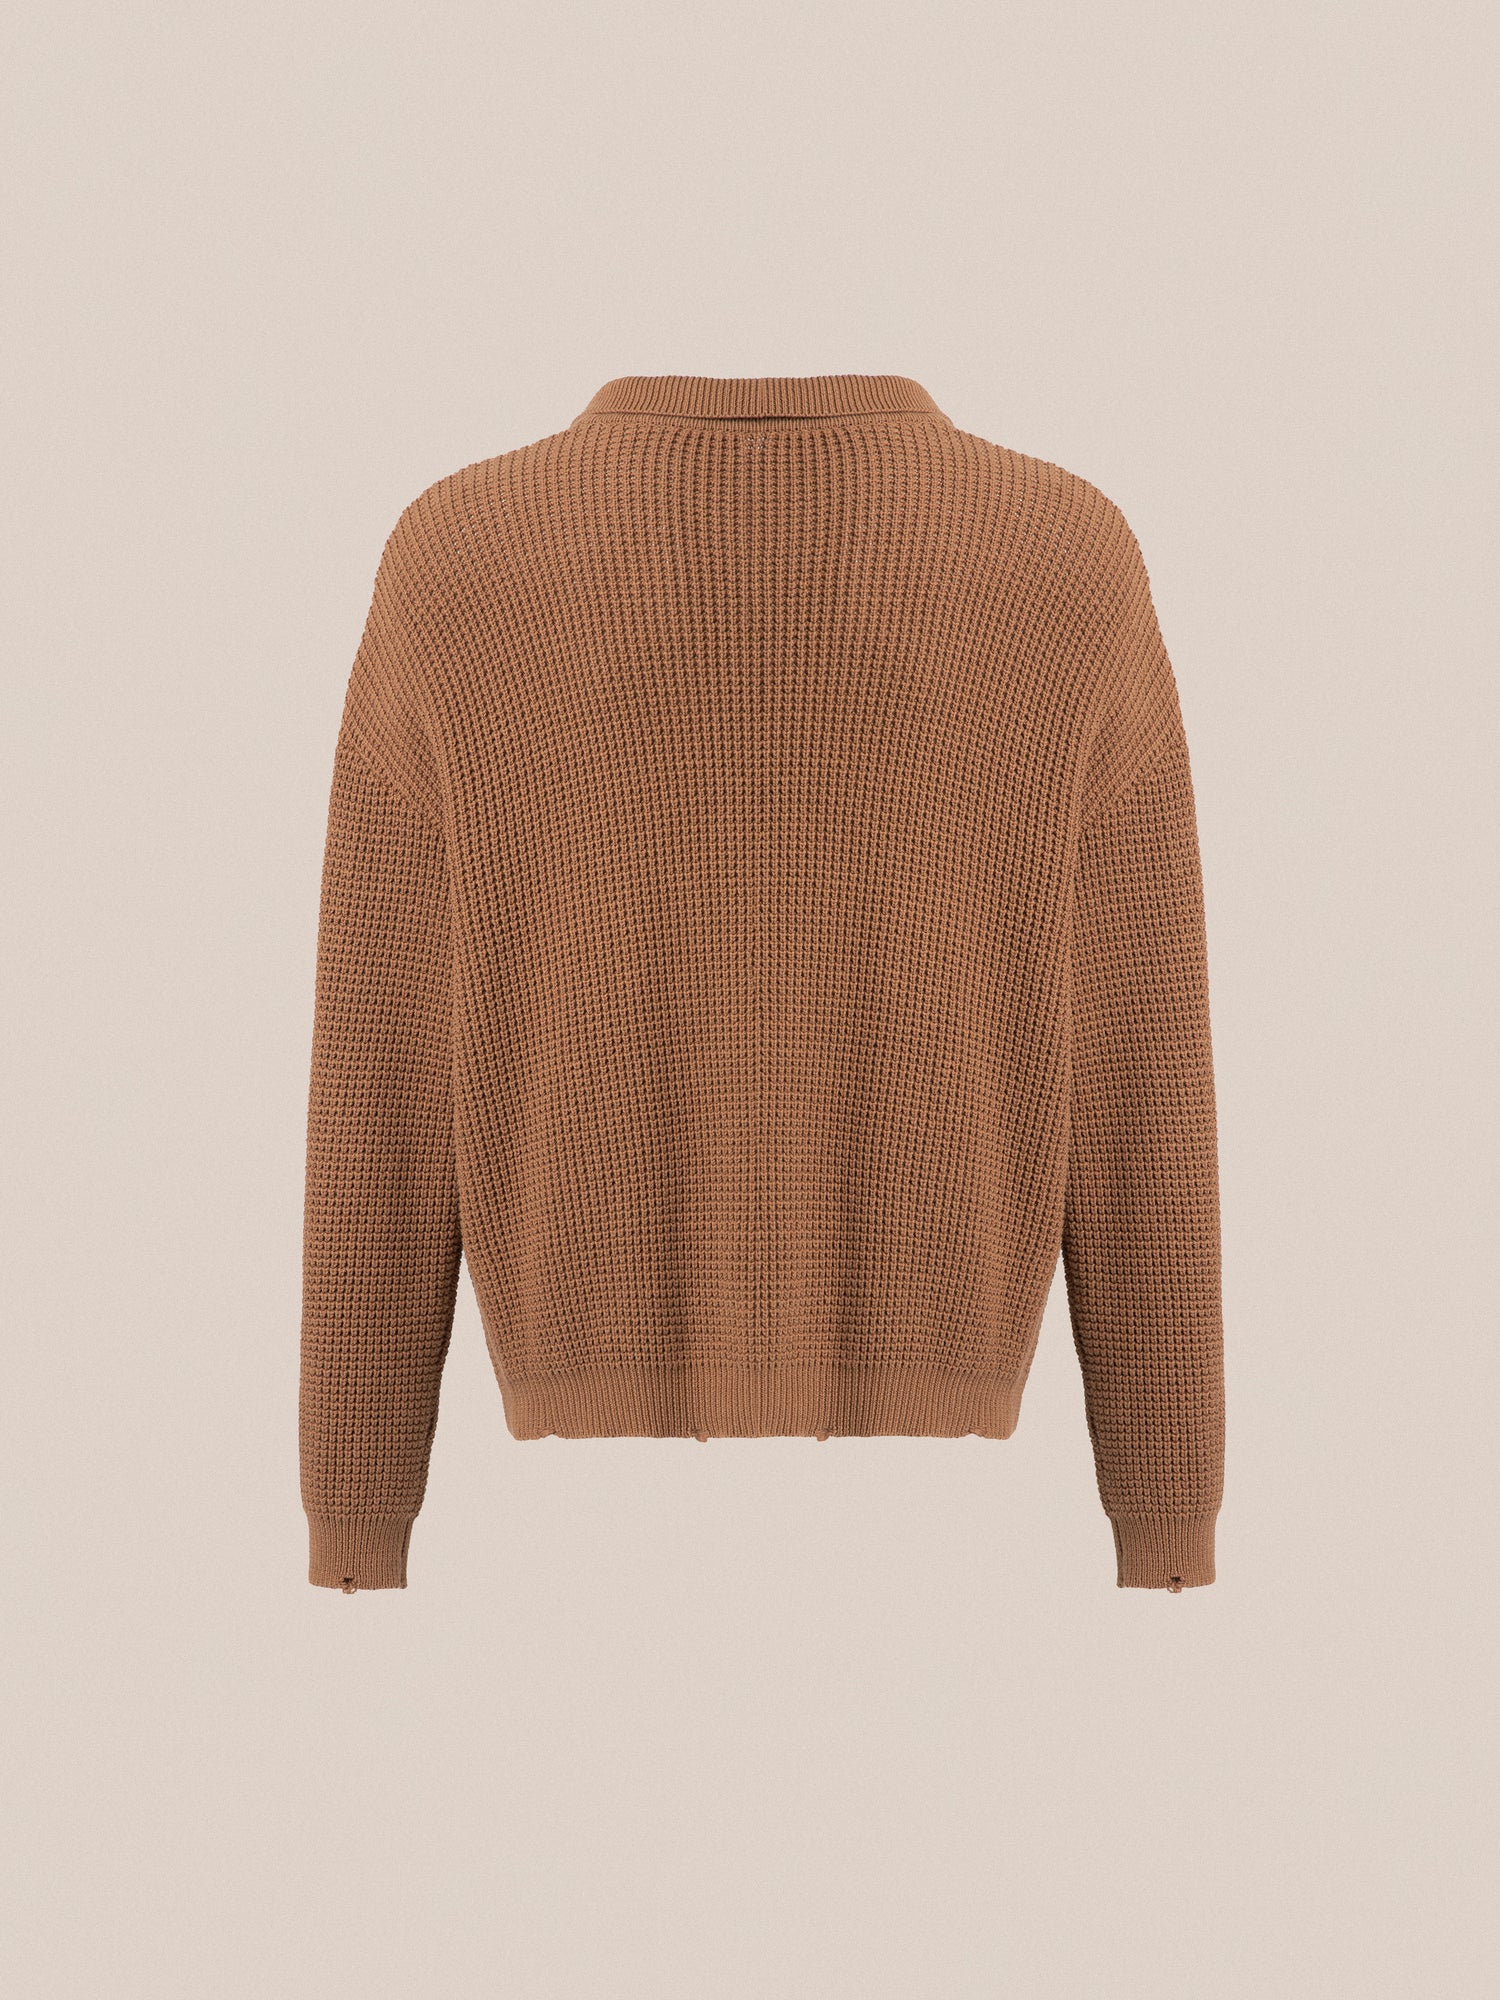 The back view of a cozy feel, Found tie-collar knit camel sweater perfect for autumn.